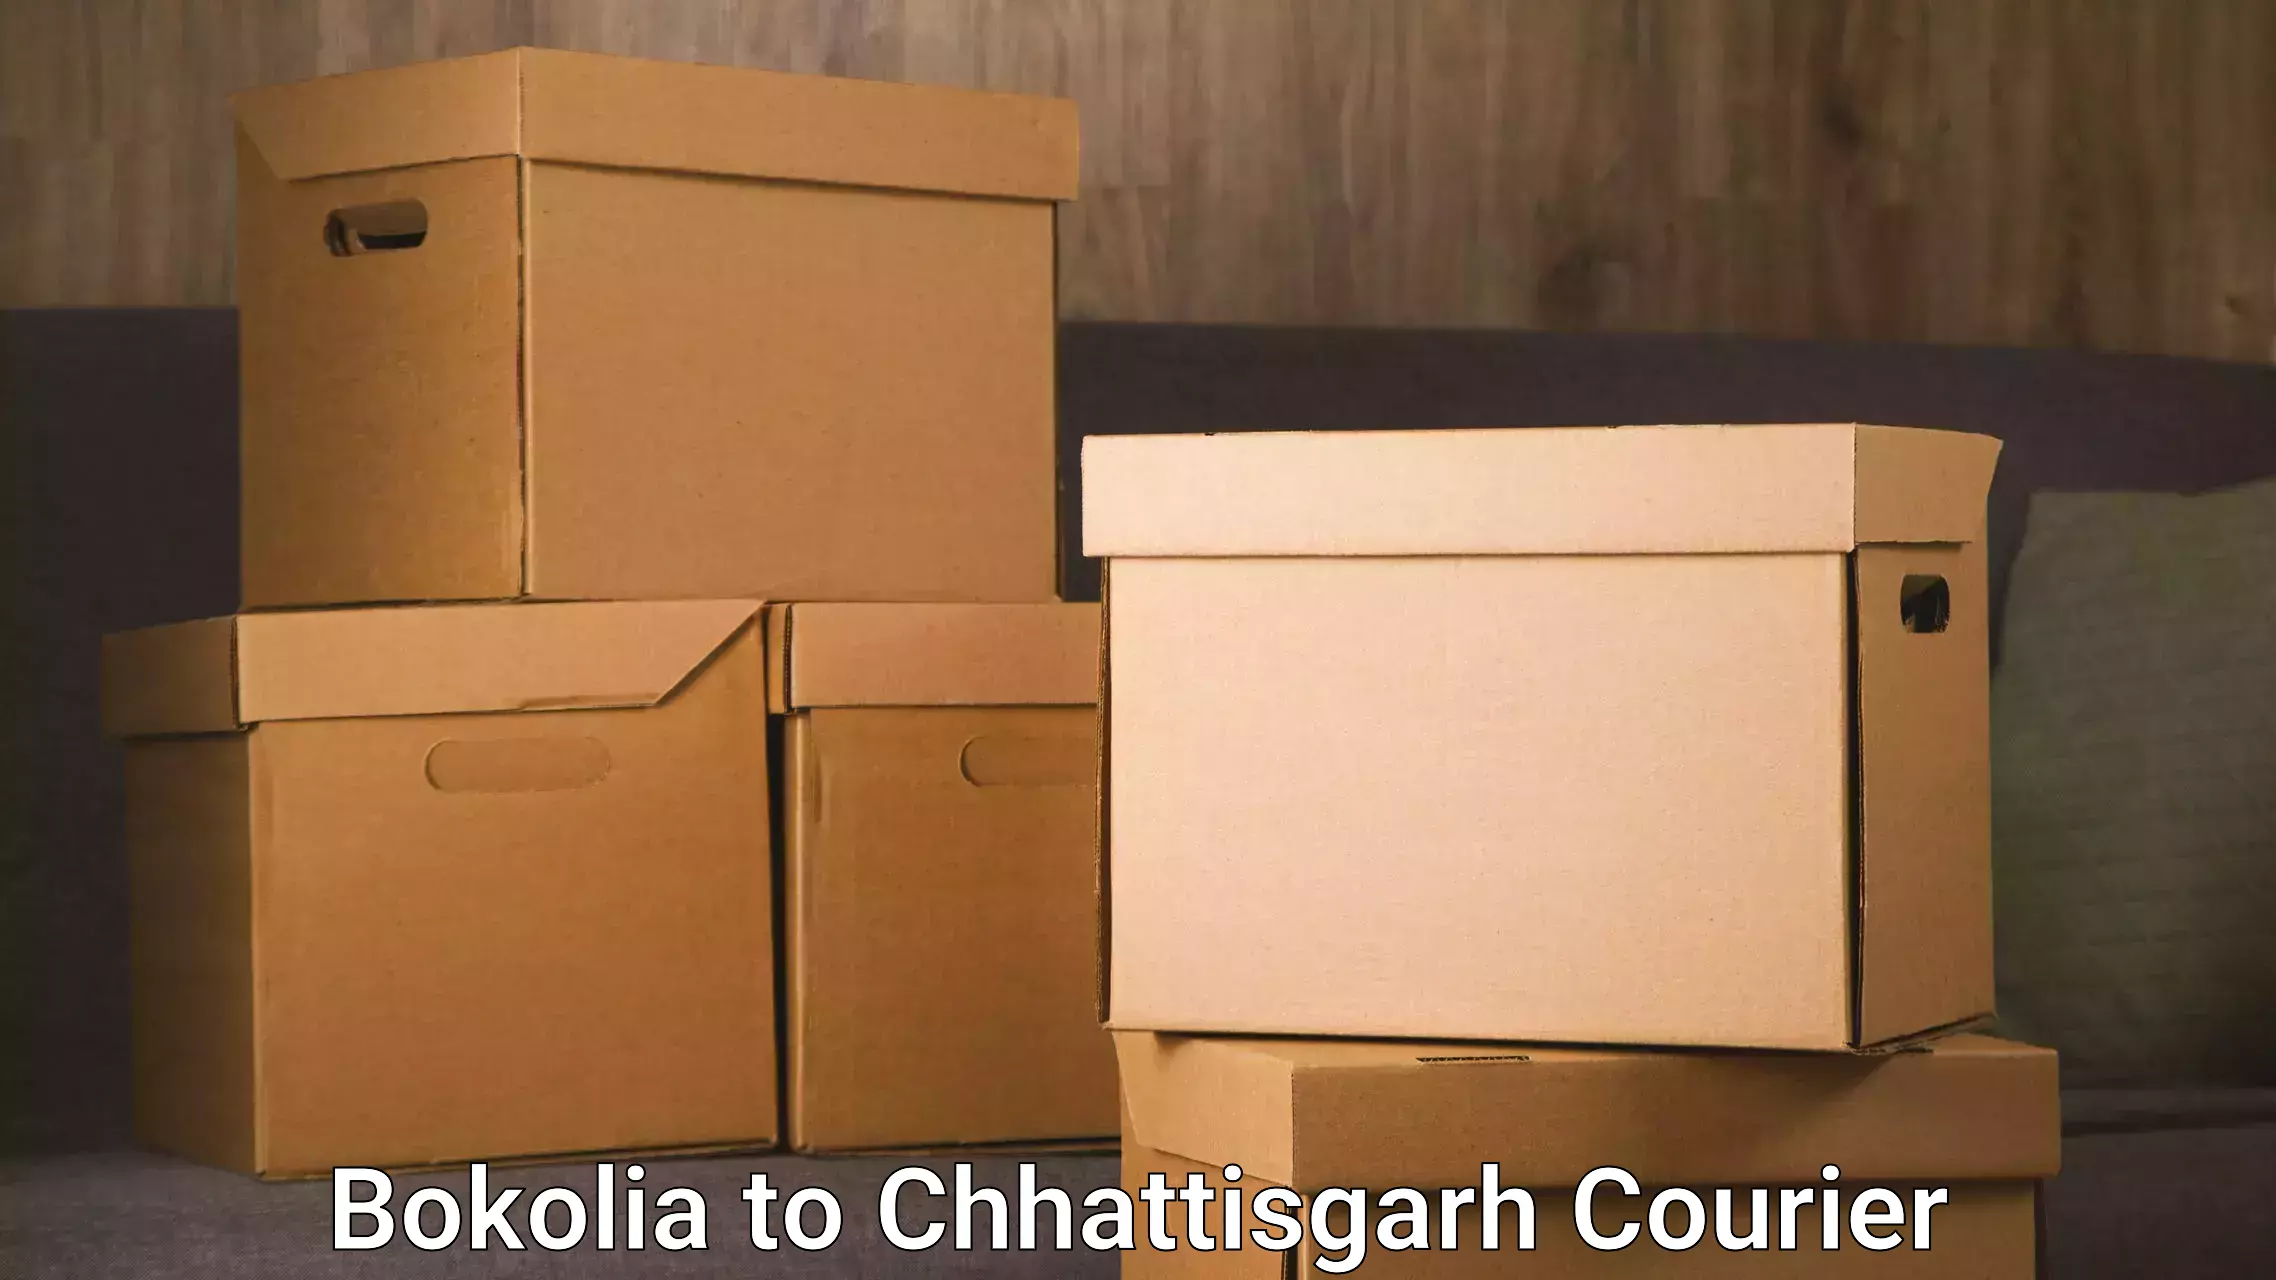 Courier tracking online Bokolia to bagbahra